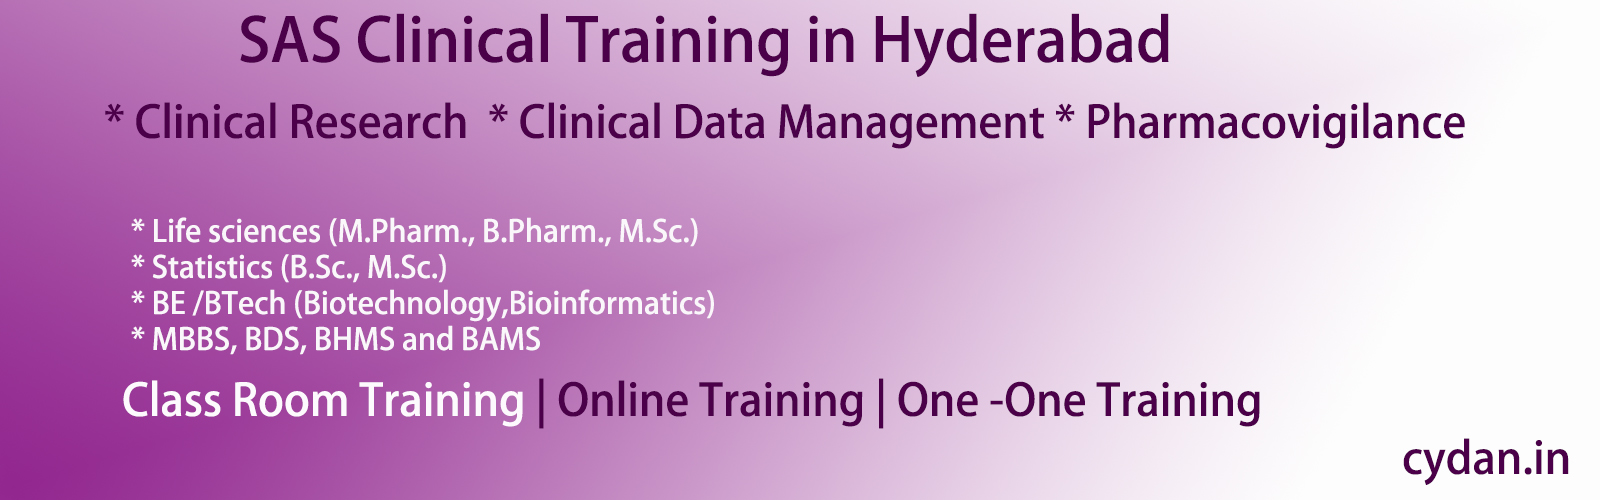 clinical sas training in hyderabad